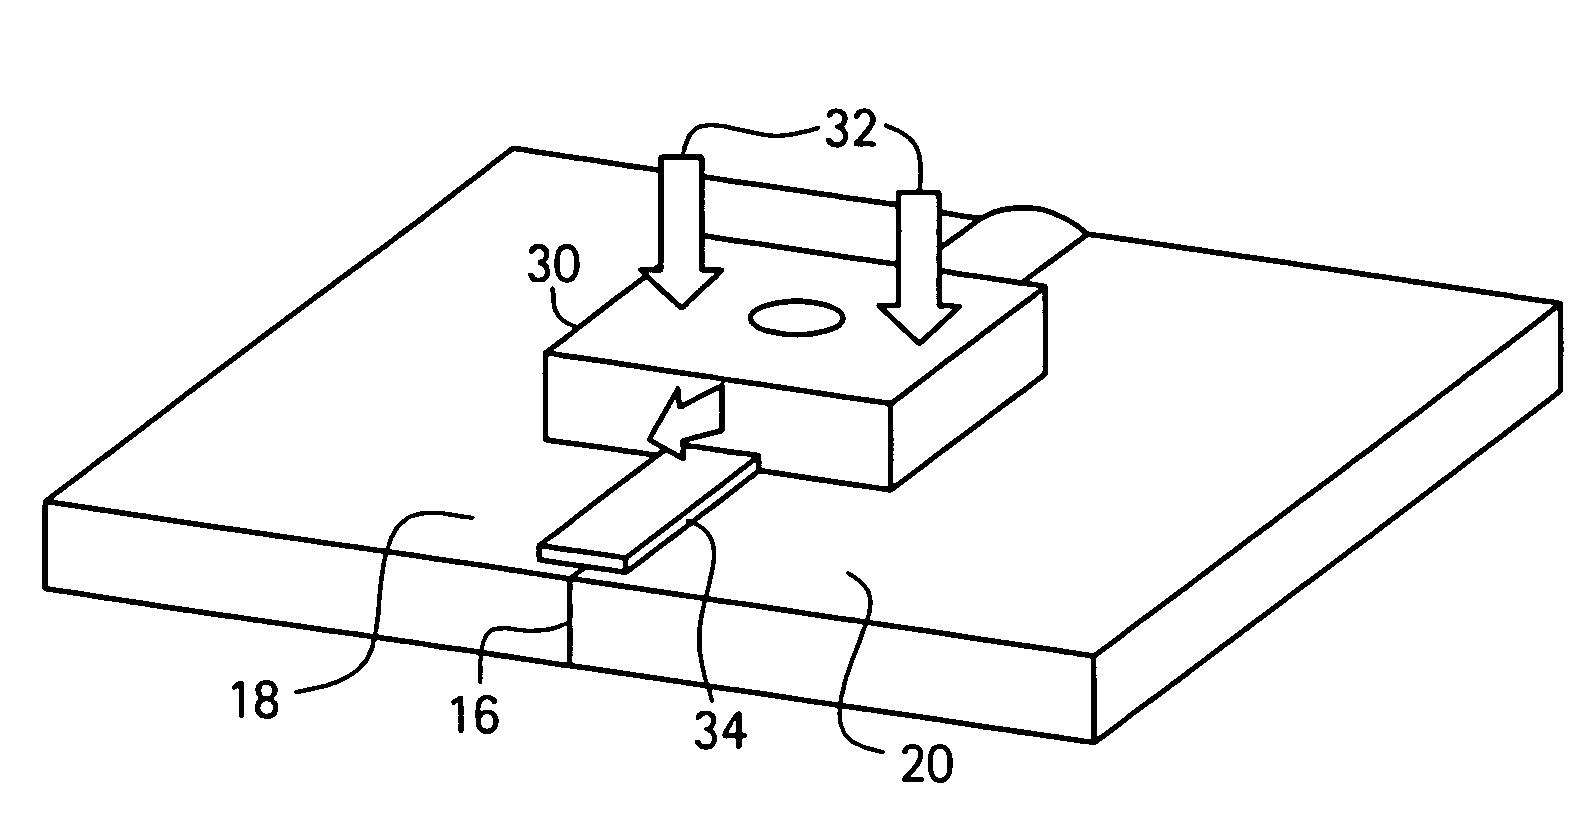 Deposition friction stir welding process and assembly